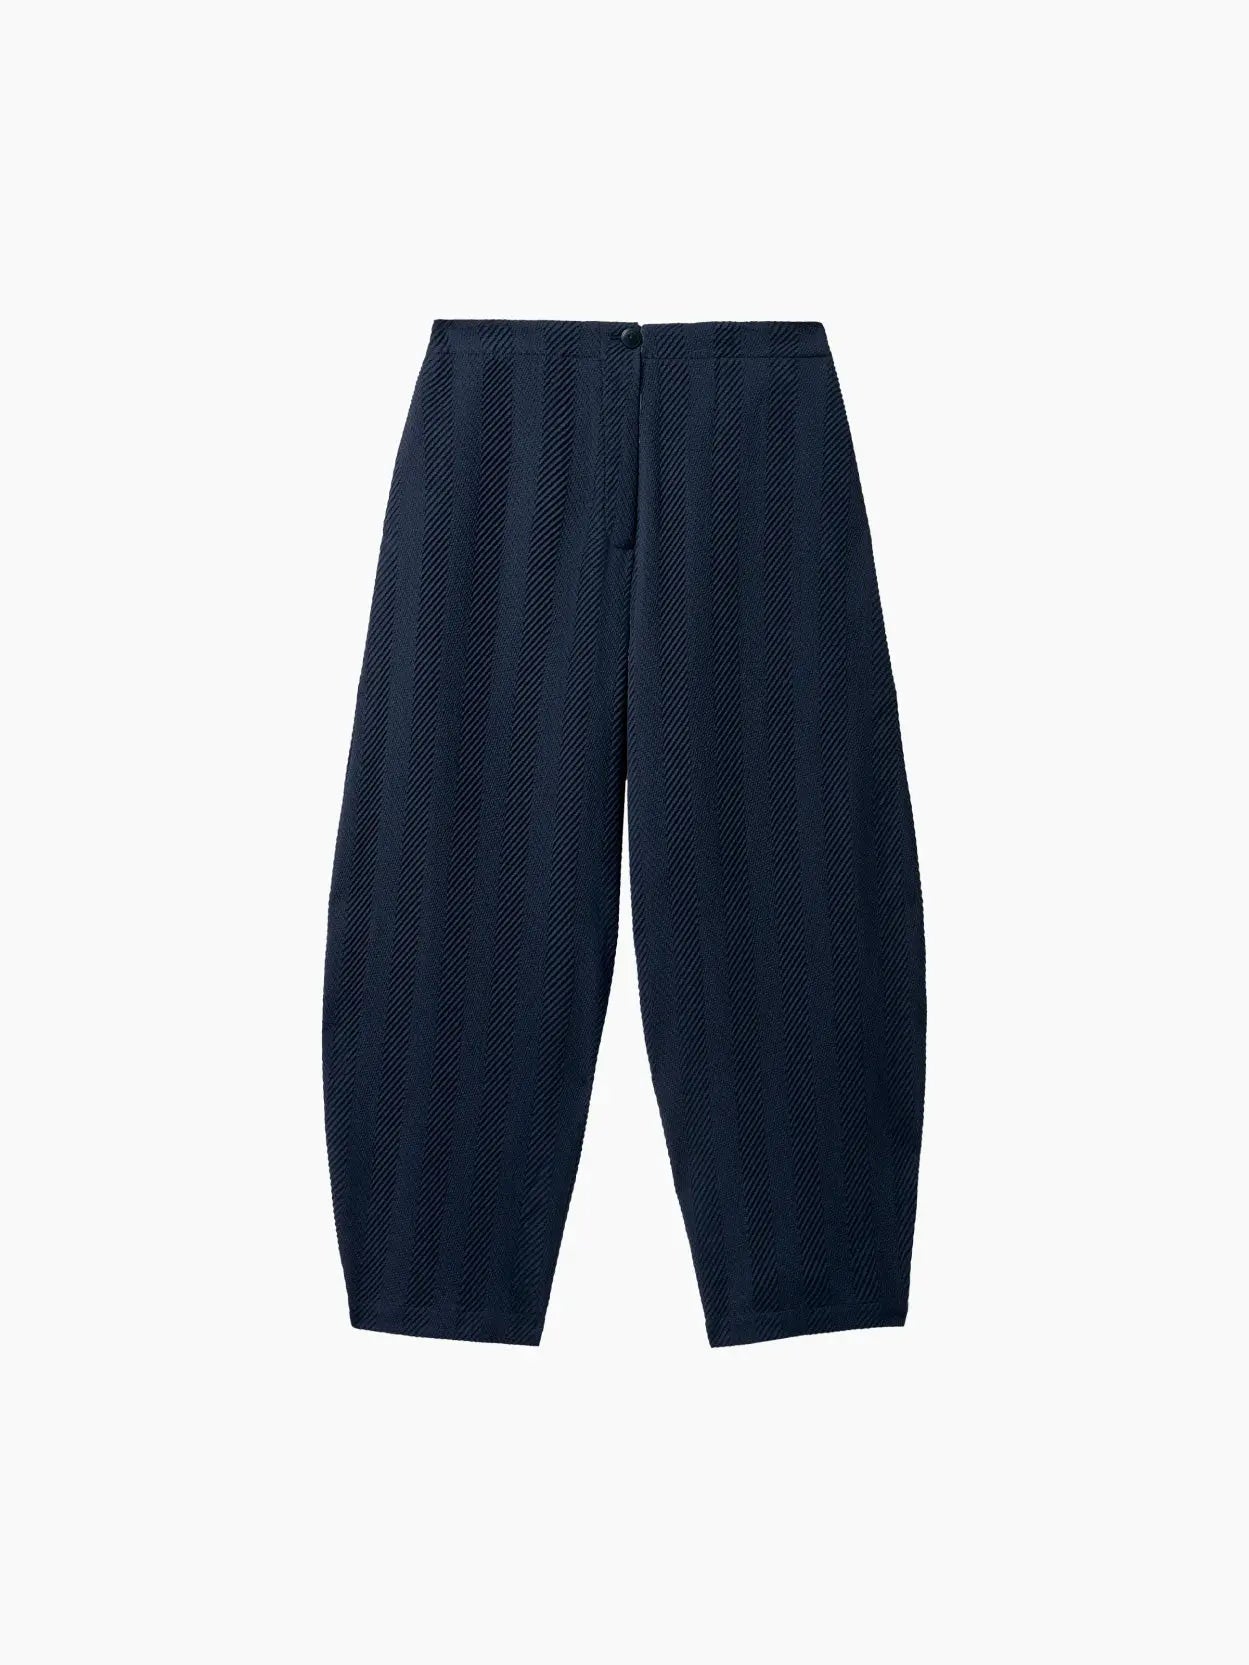 A pair of Herringbone Curved Pants Navy by Cordera displayed against a white background. The pants feature a textured, vertical stripe pattern and are designed with a relaxed fit. Discover this stylish piece at Bassalstore, your go-to store for chic fashion inspired by the vibrant streets of Barcelona.